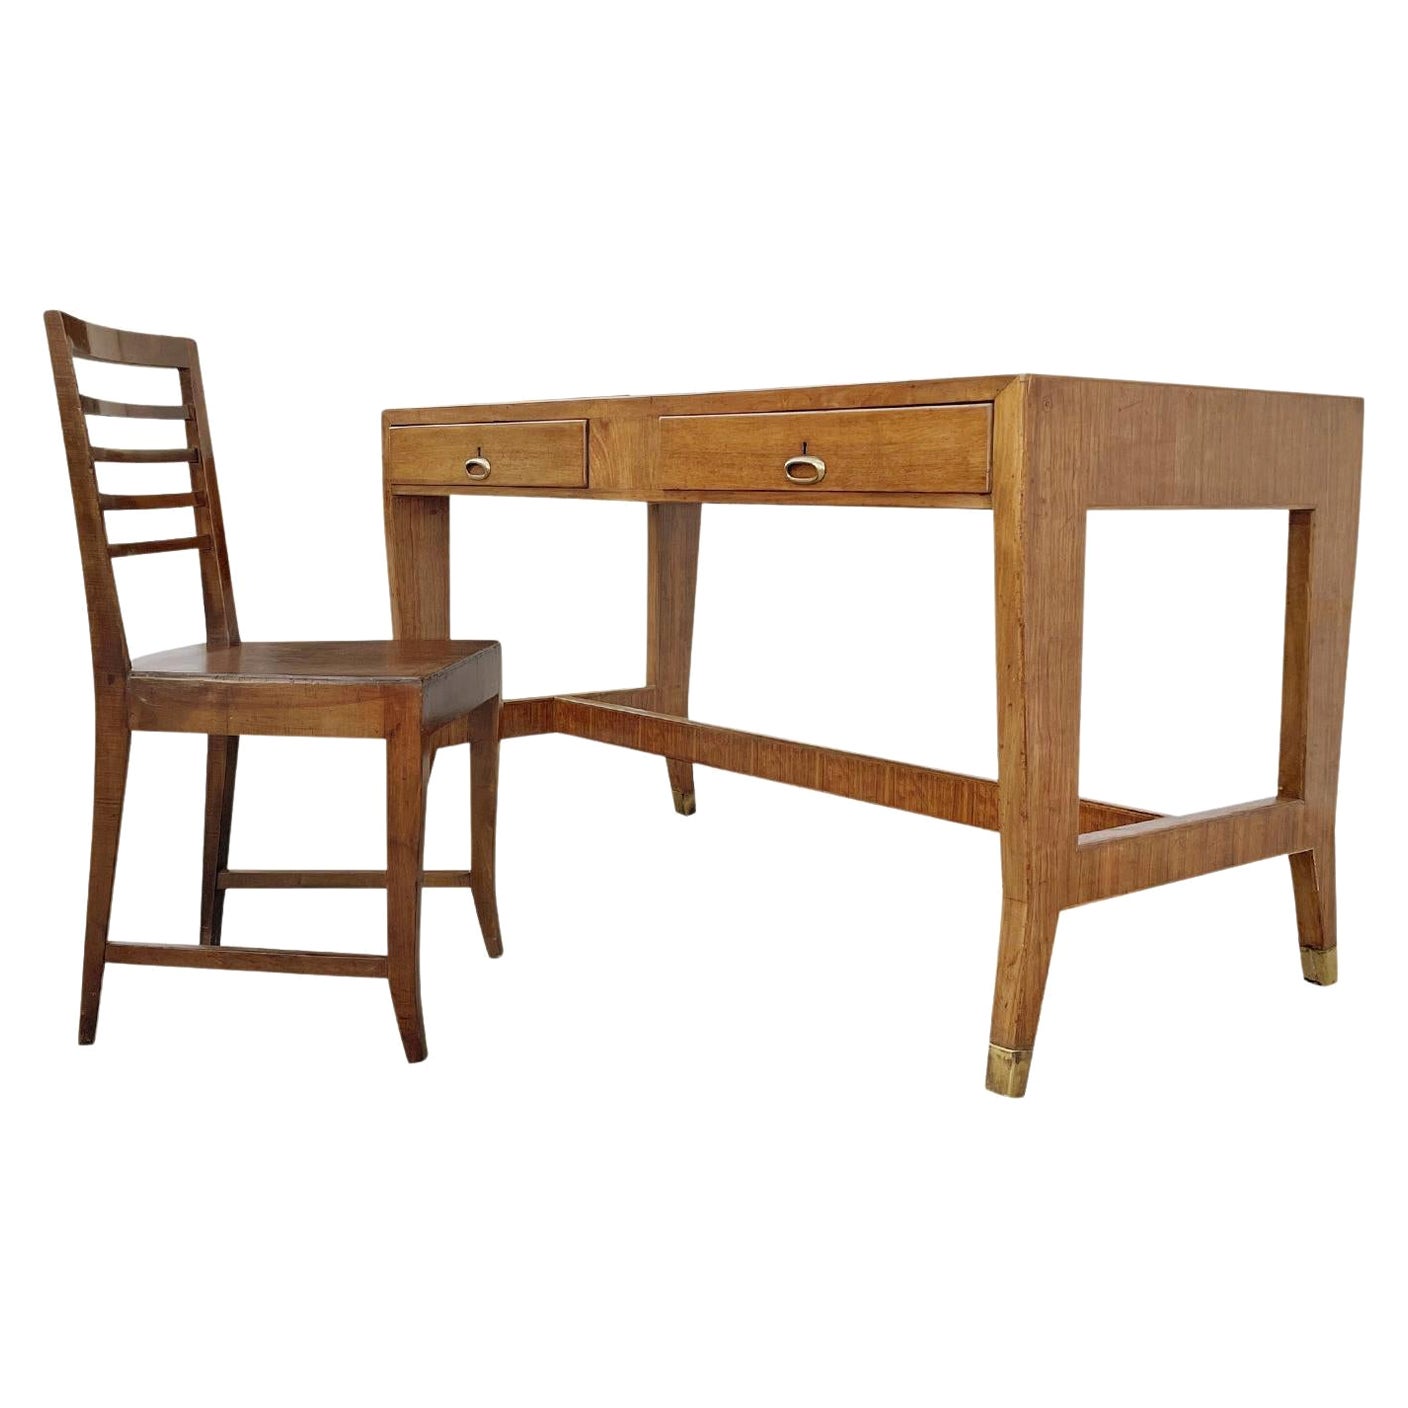 20th Century Italian Walnut Writing Table, Desk Set with a Chair by Gio Ponti